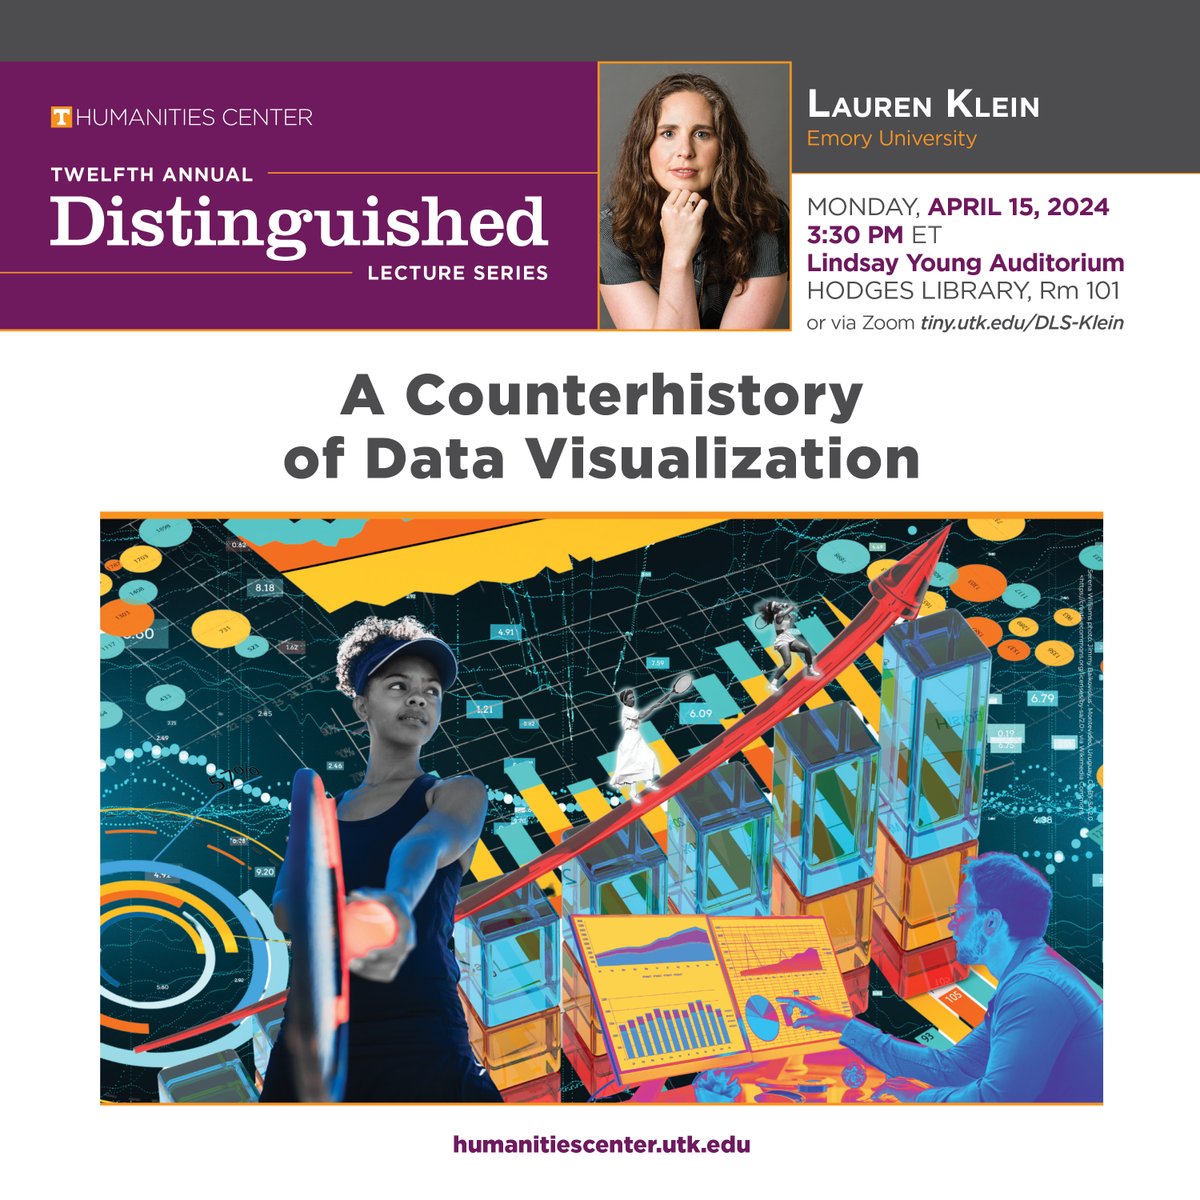 TODAY! Join us in @UTKLibraries' auditorium (or via Zoom livestream) for 'A Counterhistory of Data Visualization' with Lauren Klein, the final talk in our 2023-2024 Distinguished Lecture Series. We hope to see you there! humanitiescenter.utk.edu/programs/disti…